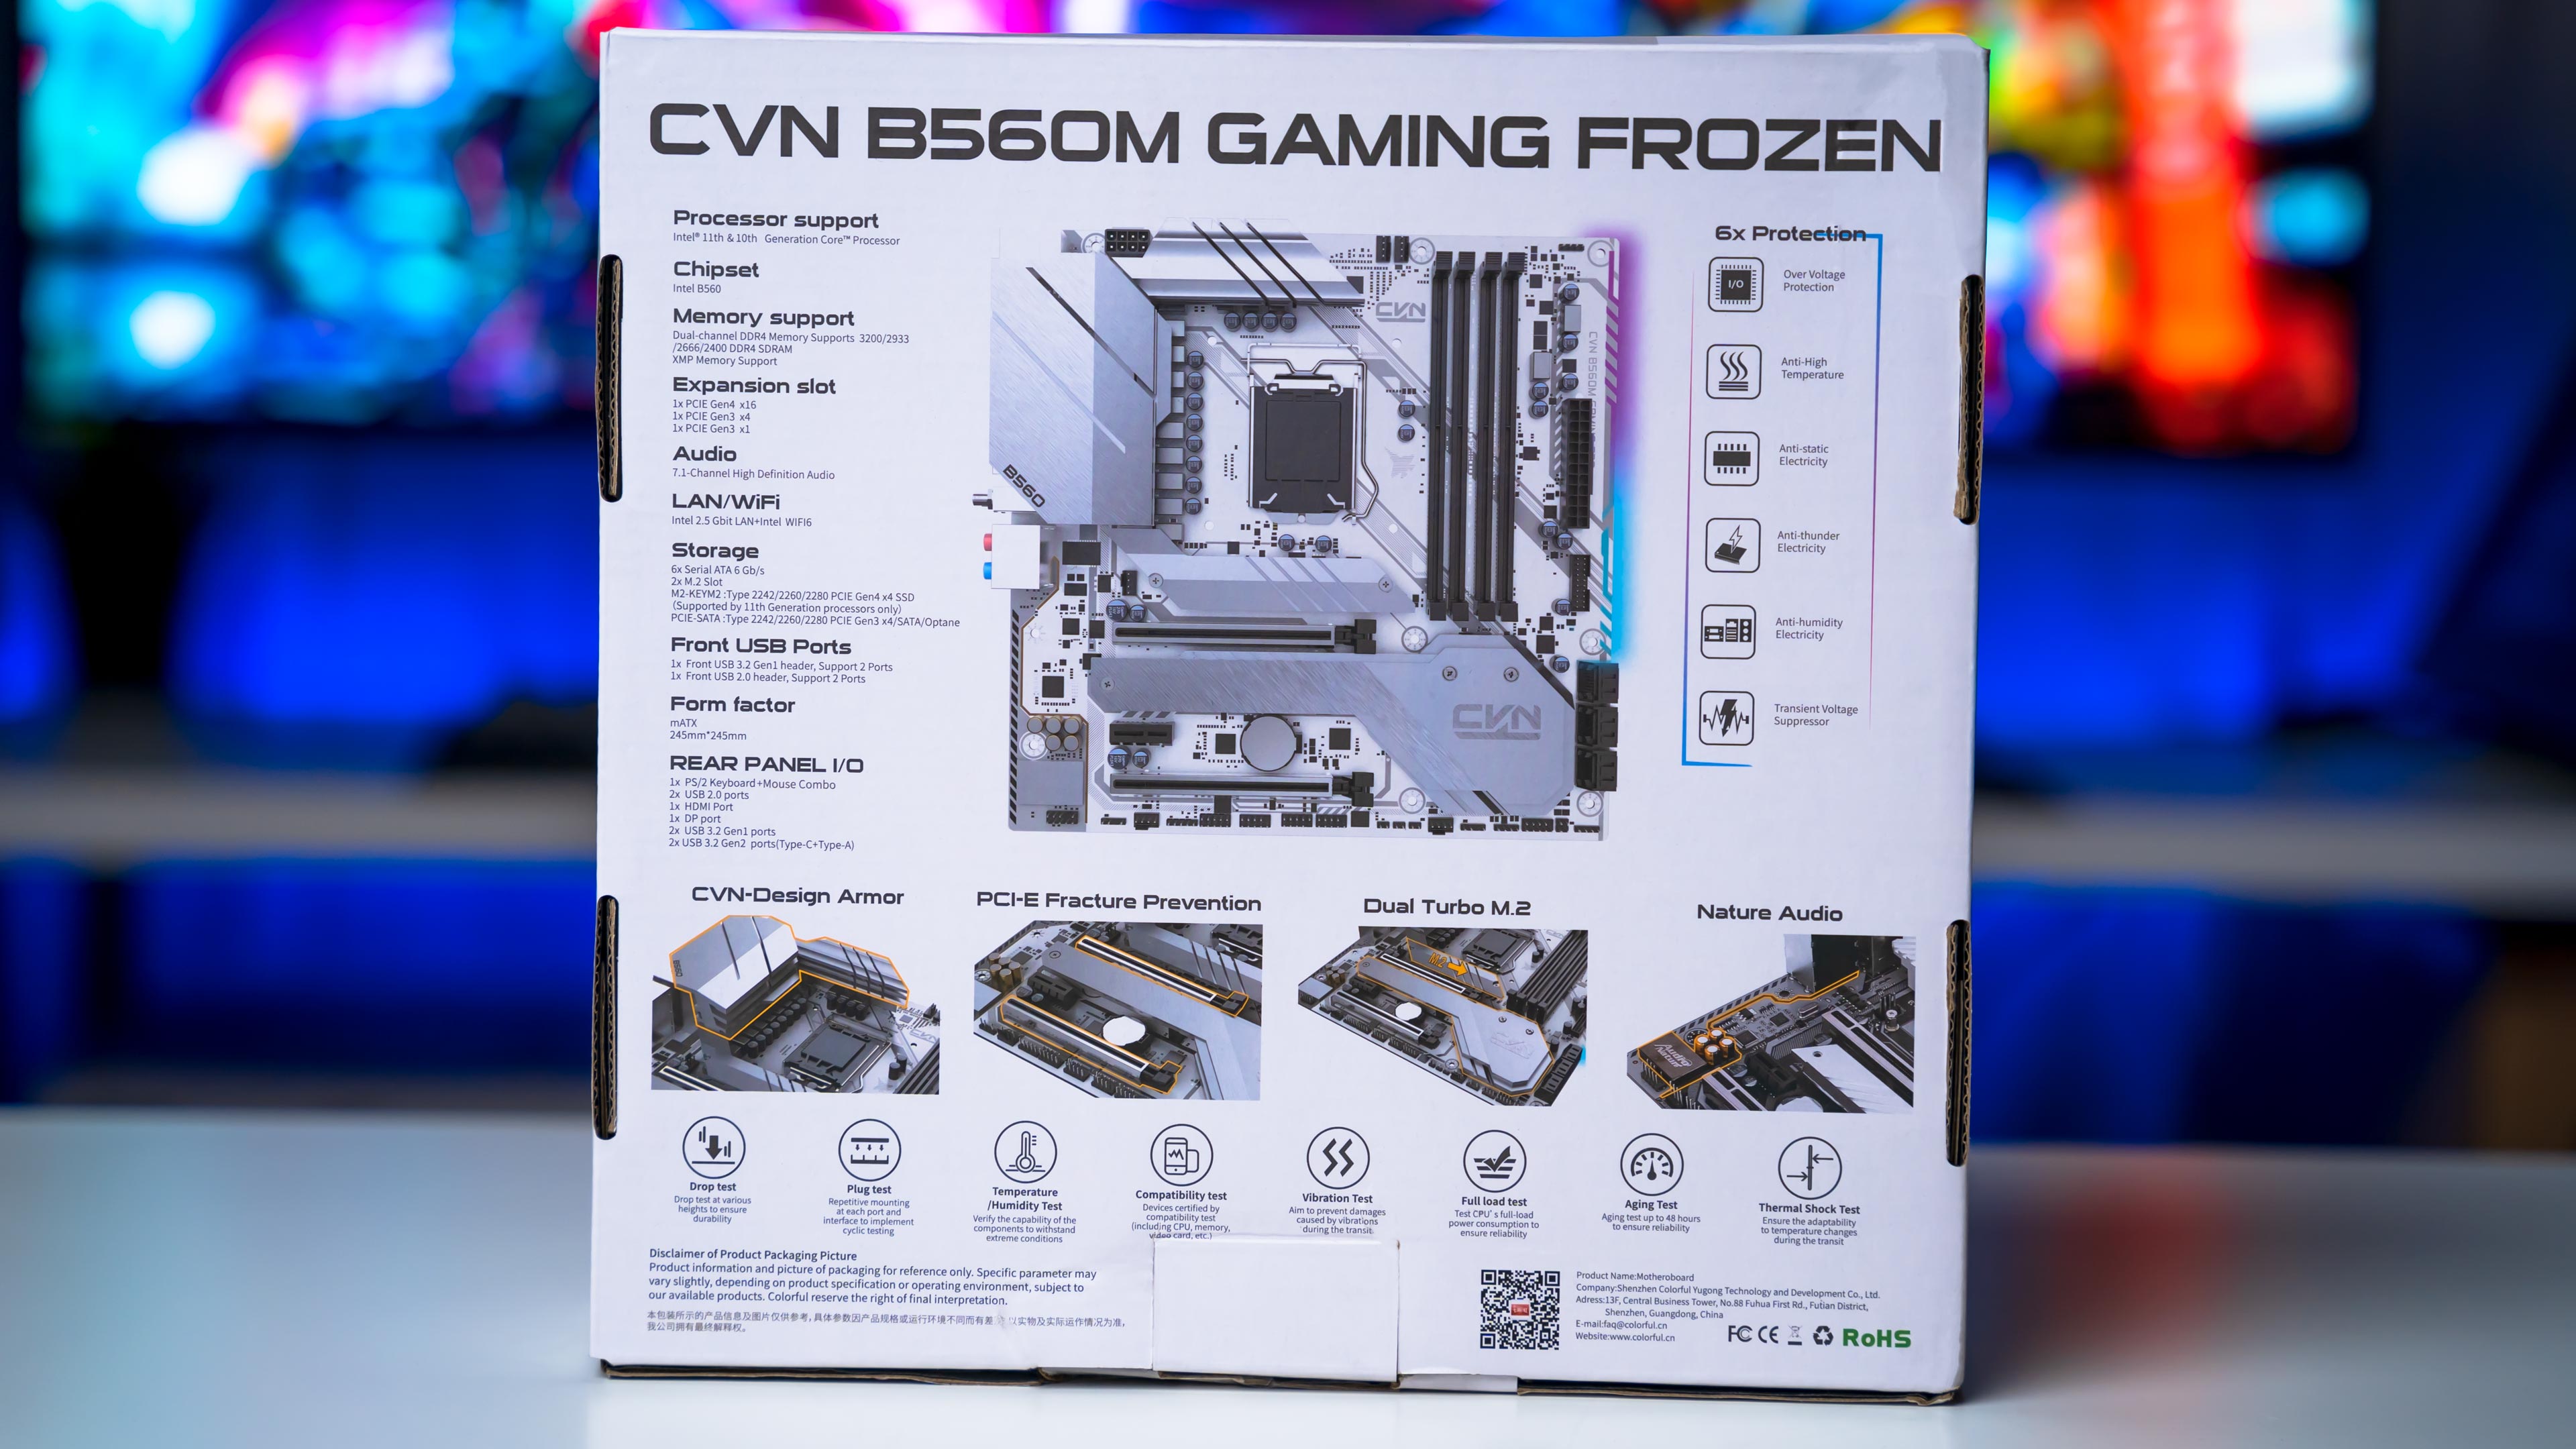 Colorful B560M CVN Gaming Frozen Box (4)